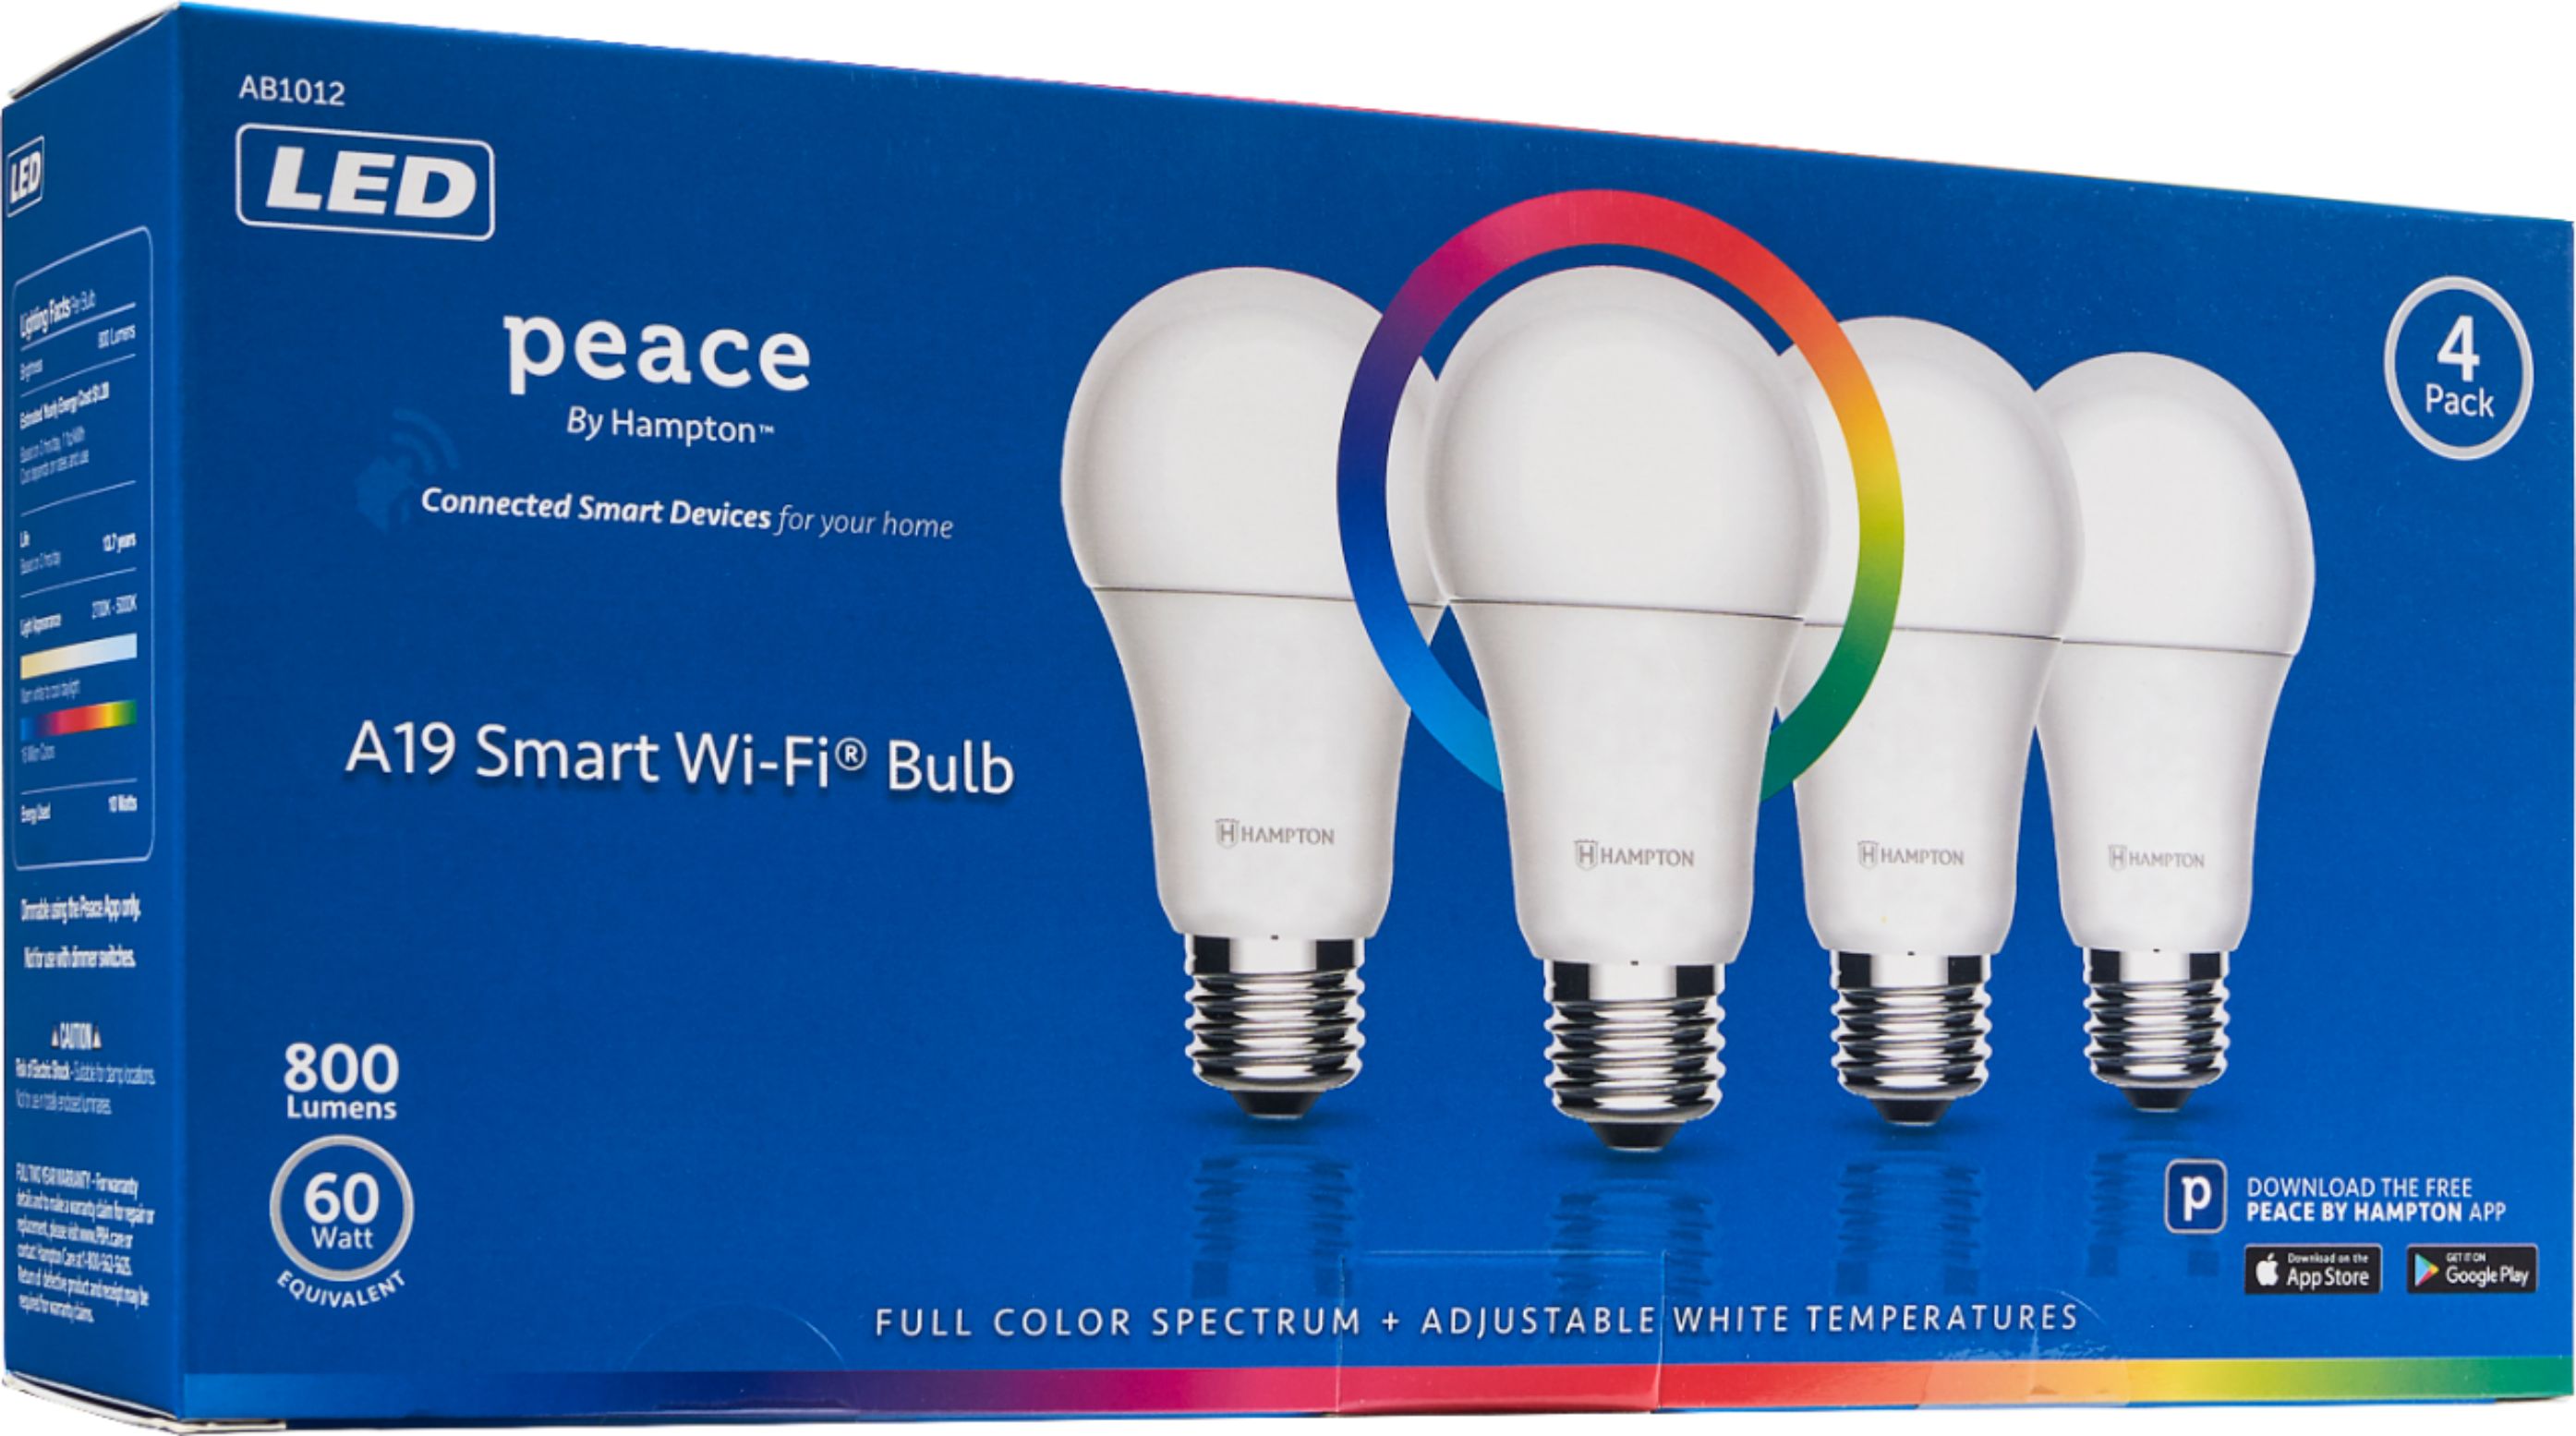 Peace by A19 LED Smart Wi-Fi Bulb (4-pack) Full Color AB1012 -